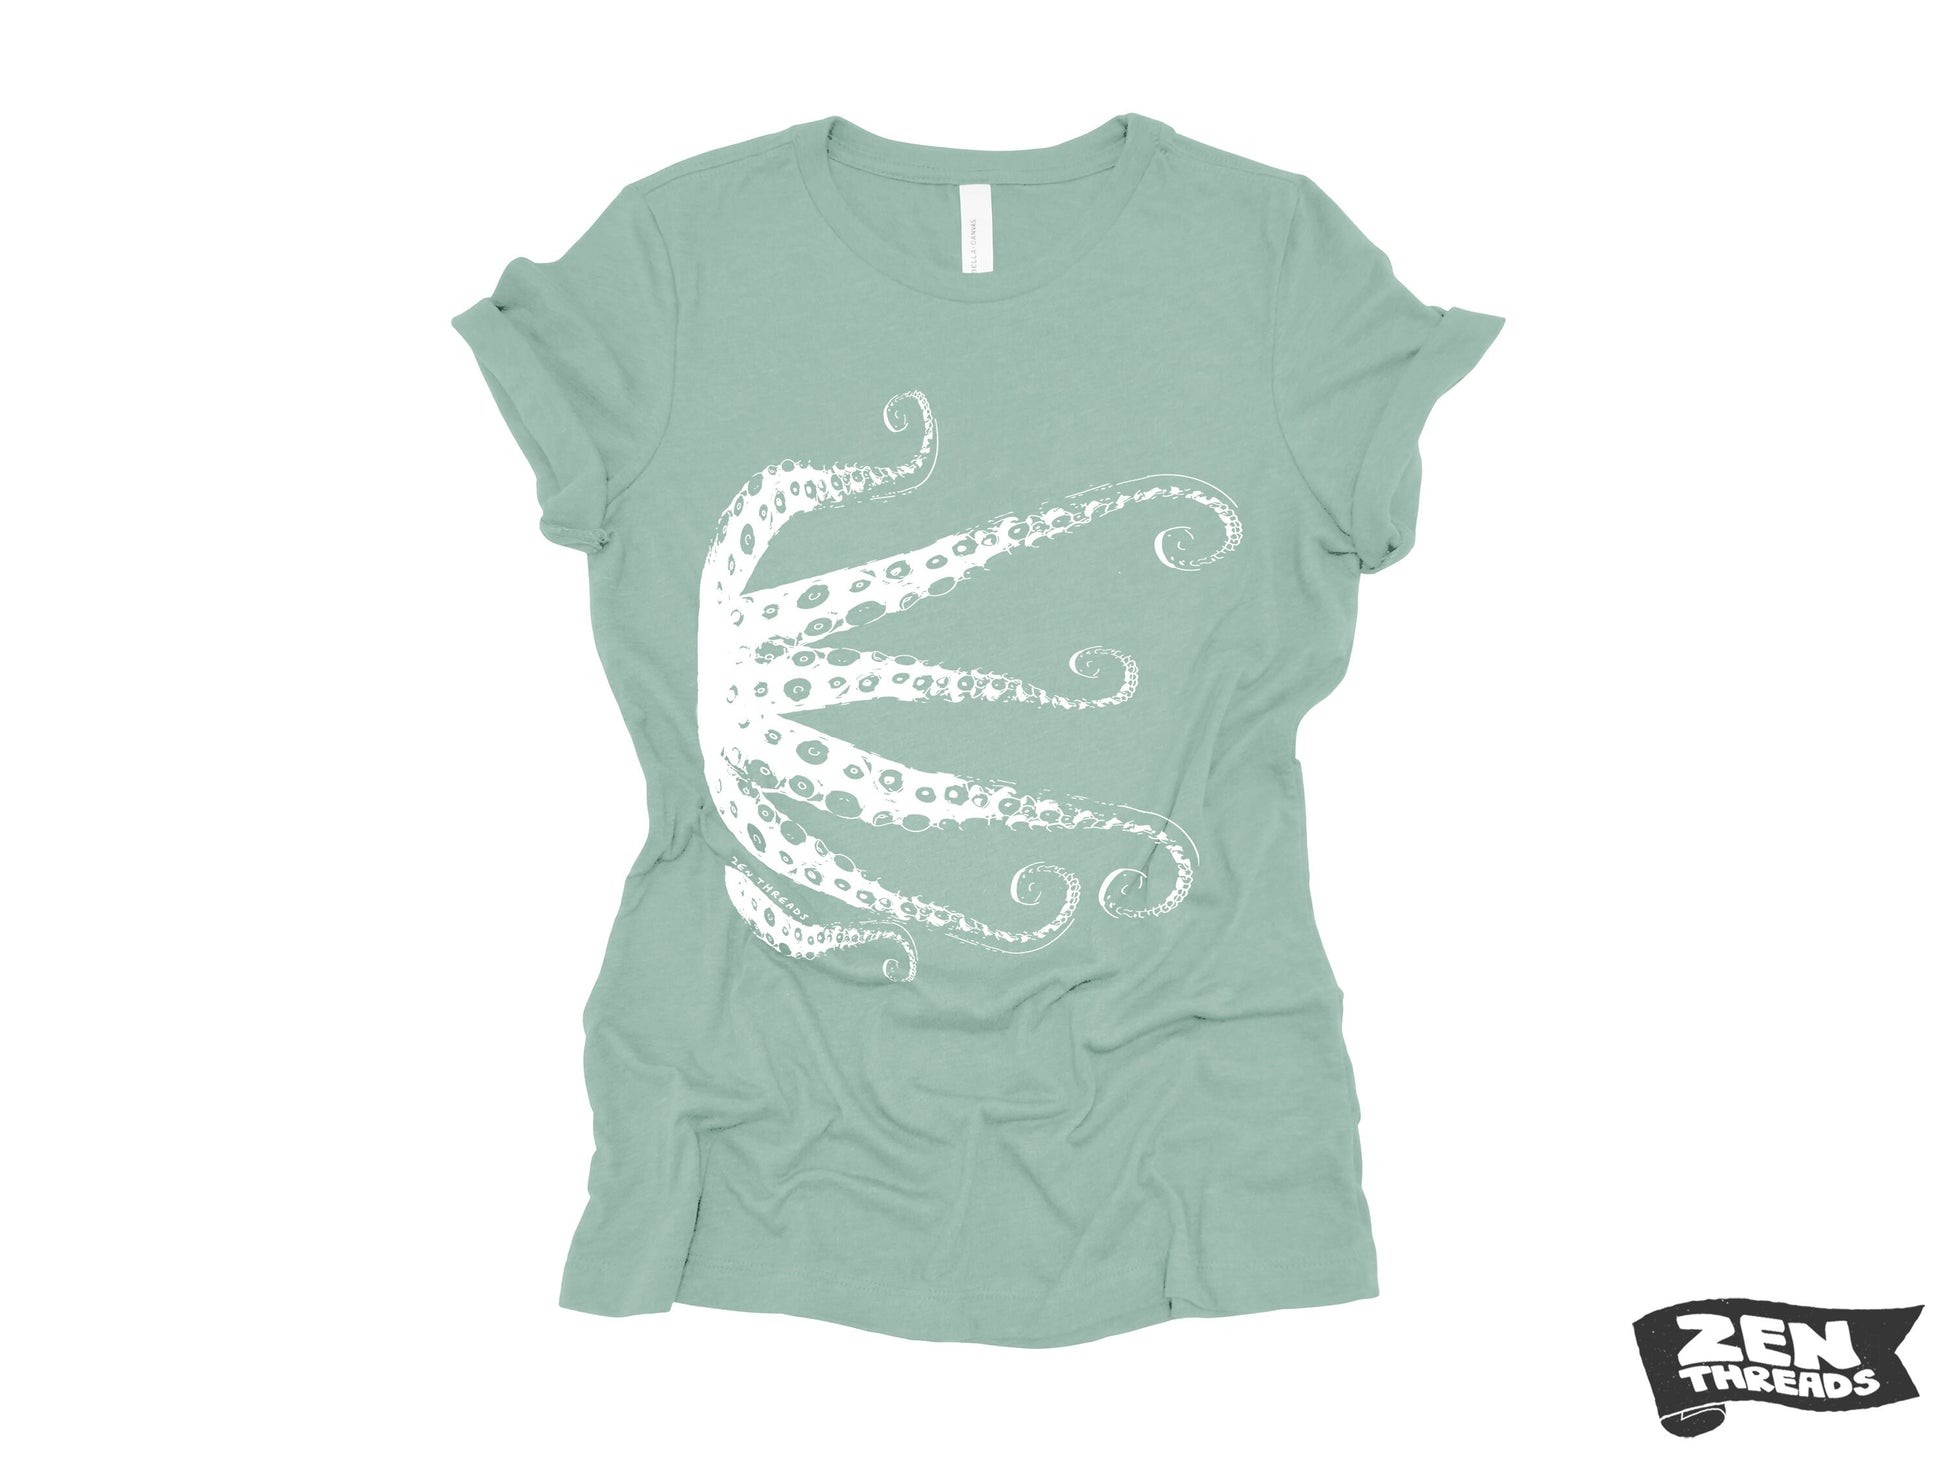 Womens OCTOPUS Tentacles squid eco printed tee t-shirt (+ Colors Available) custom ladies relaxed crew neck shirt ocean lover graphic